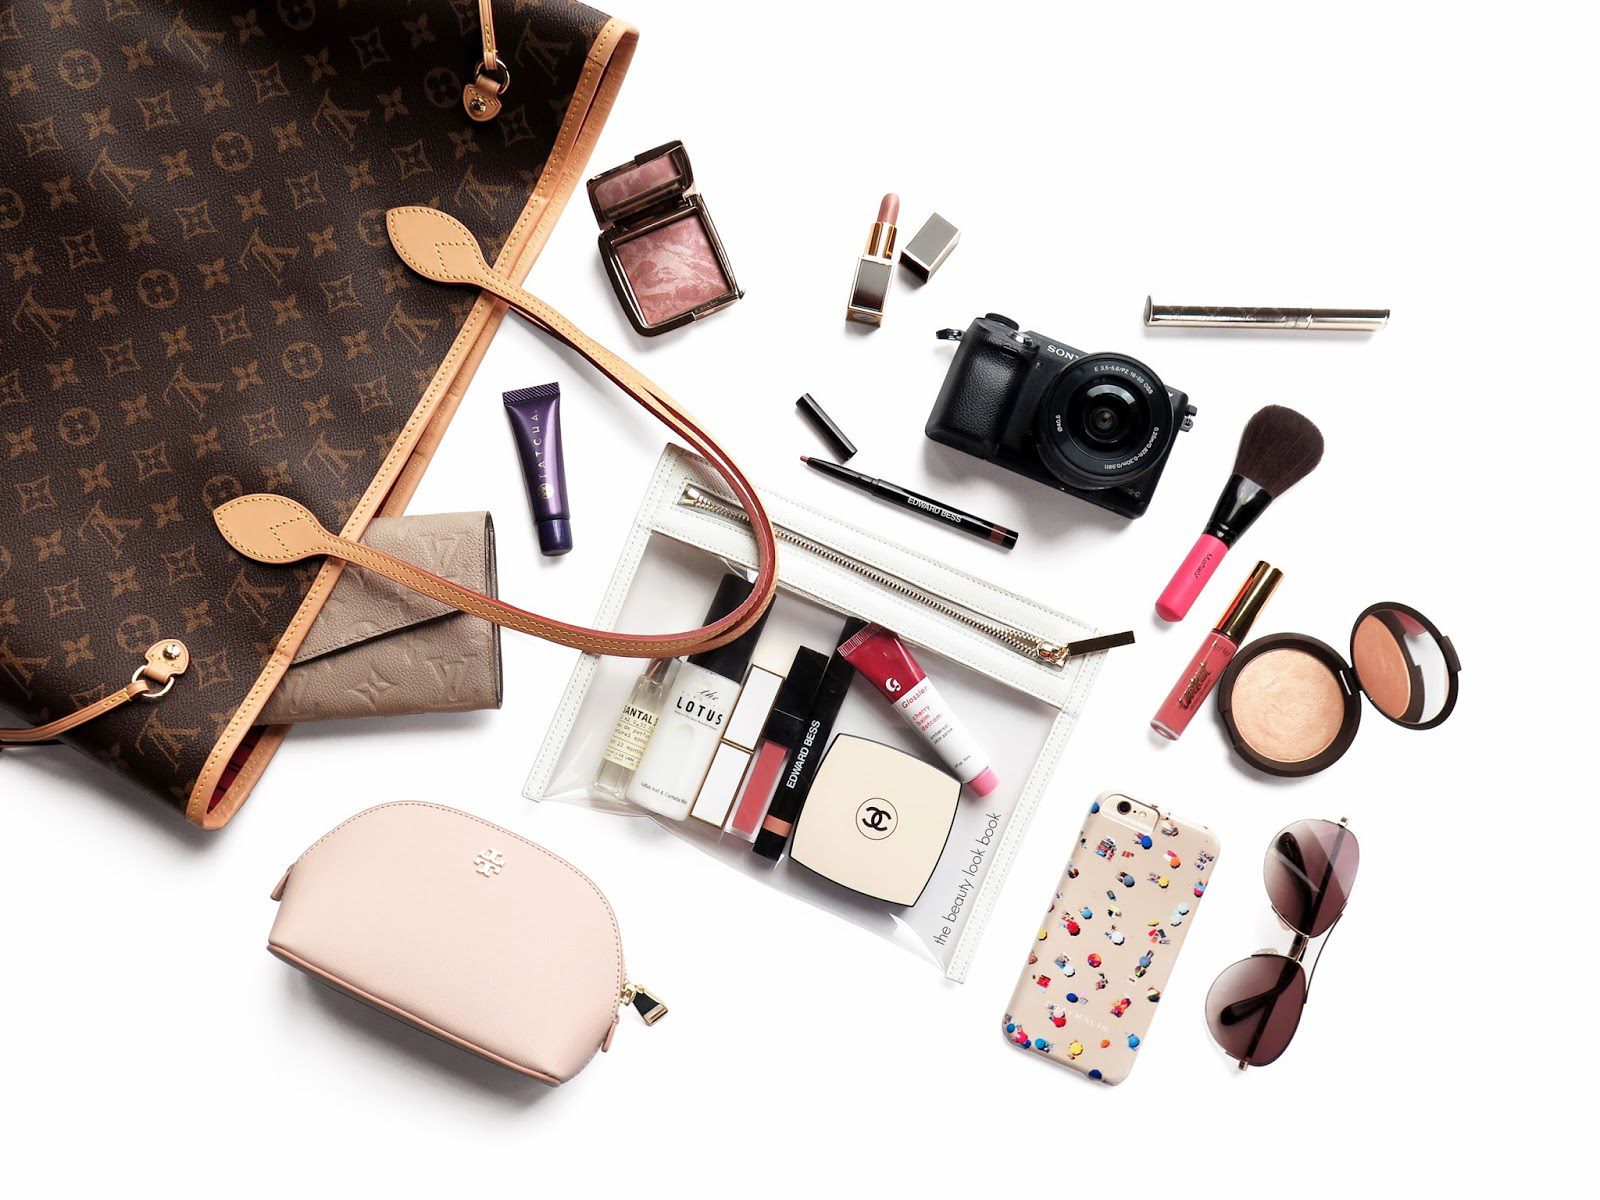 What's In My Bag  My Travel, Makeup, & Everyday Essentials